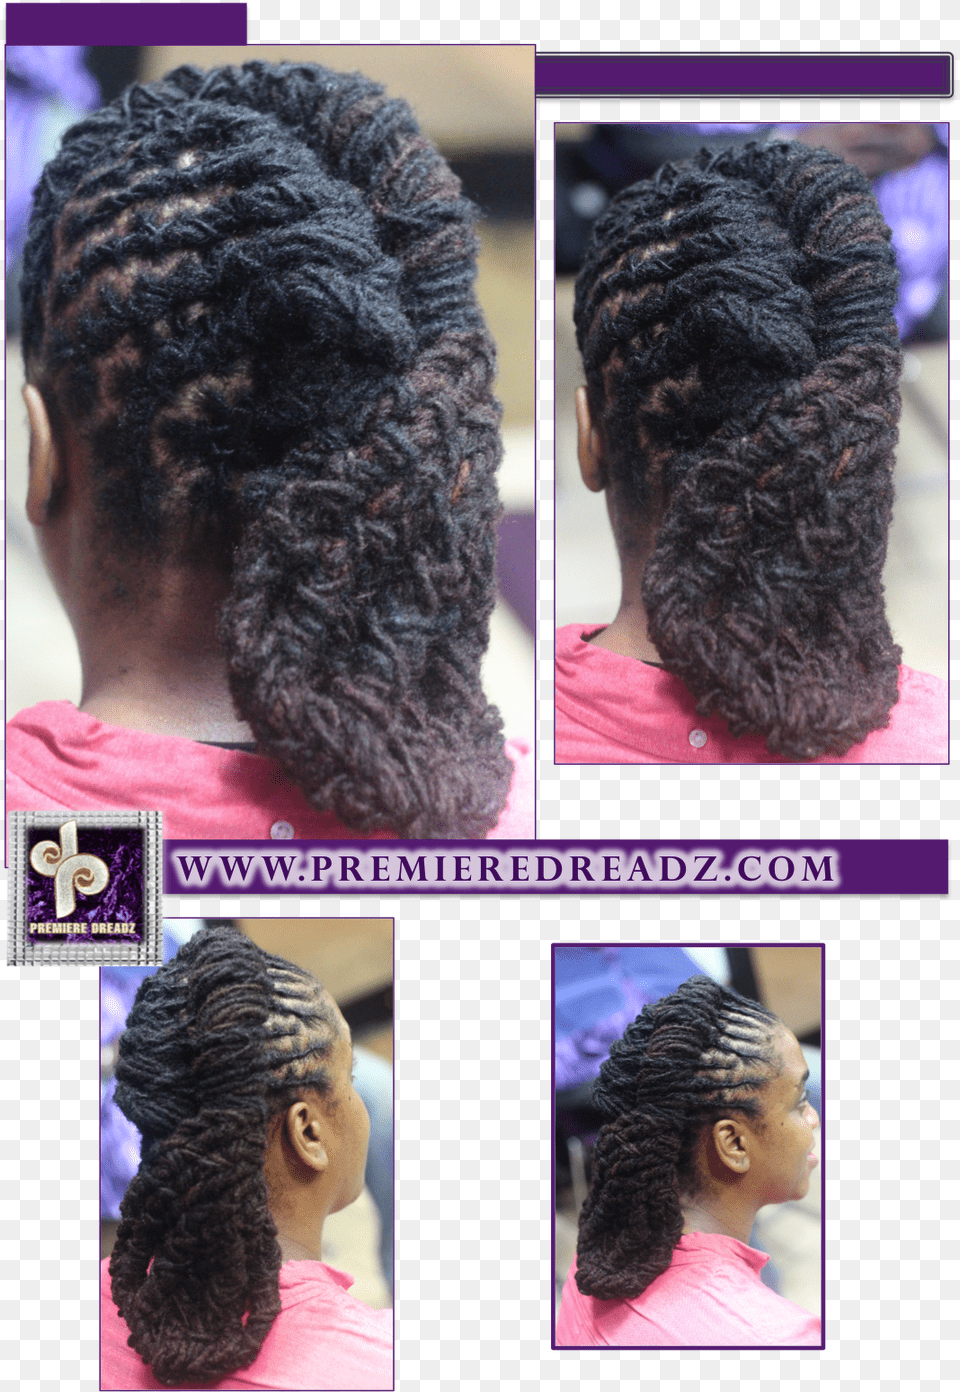 Dreadlock Styles For Women Premiere Dreadz Lace Wig, Person, Child, Female, Girl Free Png